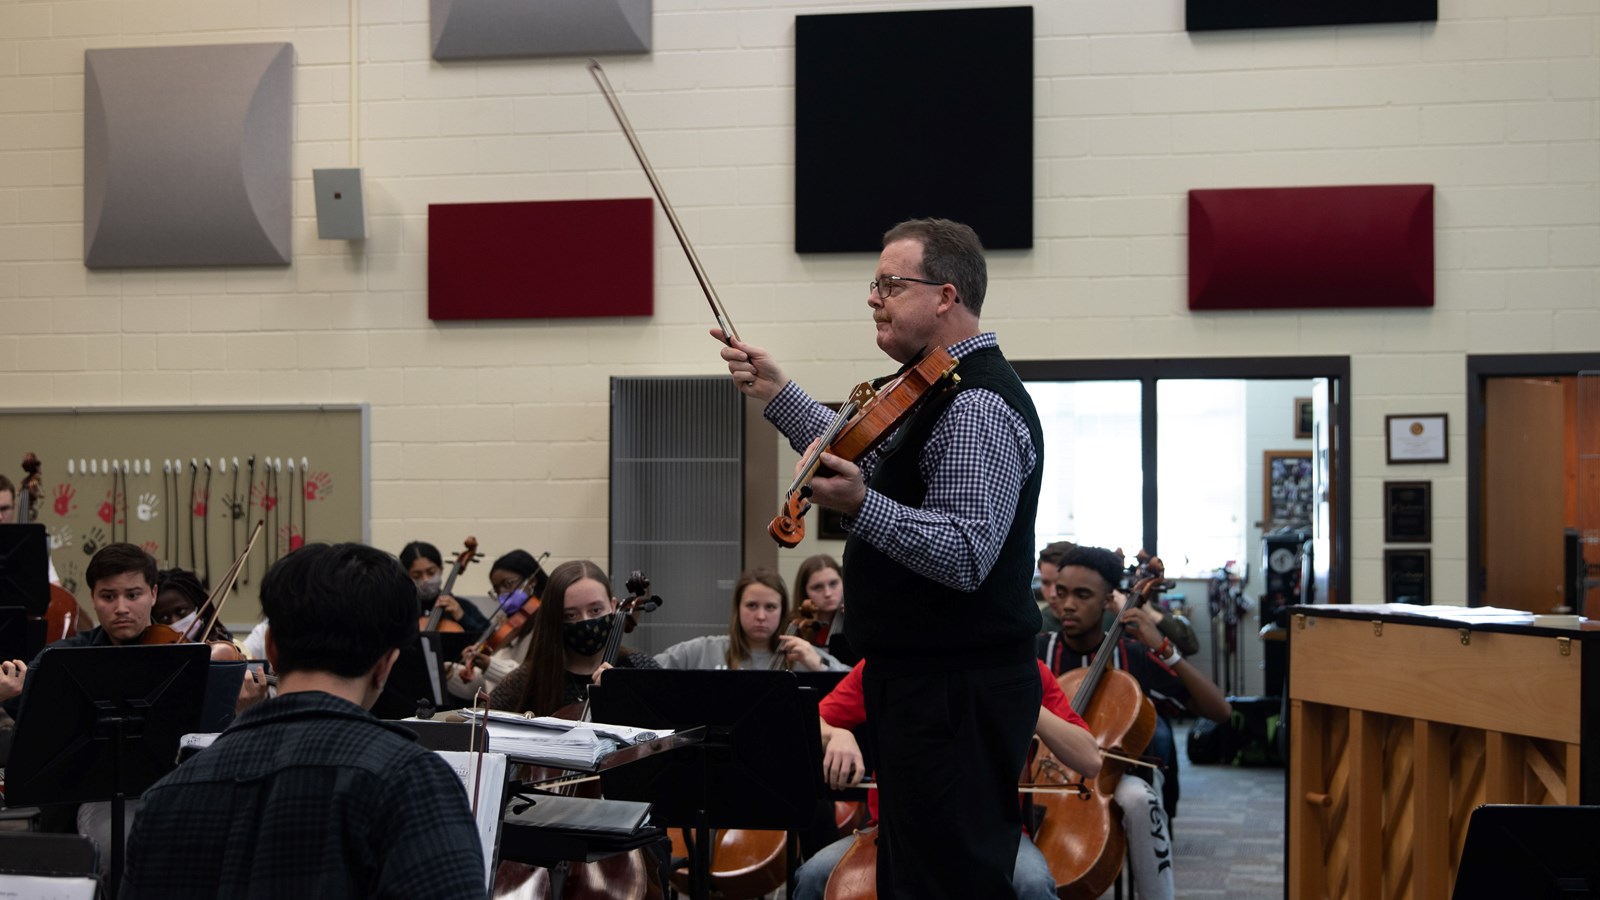 Jim Palmer has been teaching orchestra students at Allatoona High School since 2008.